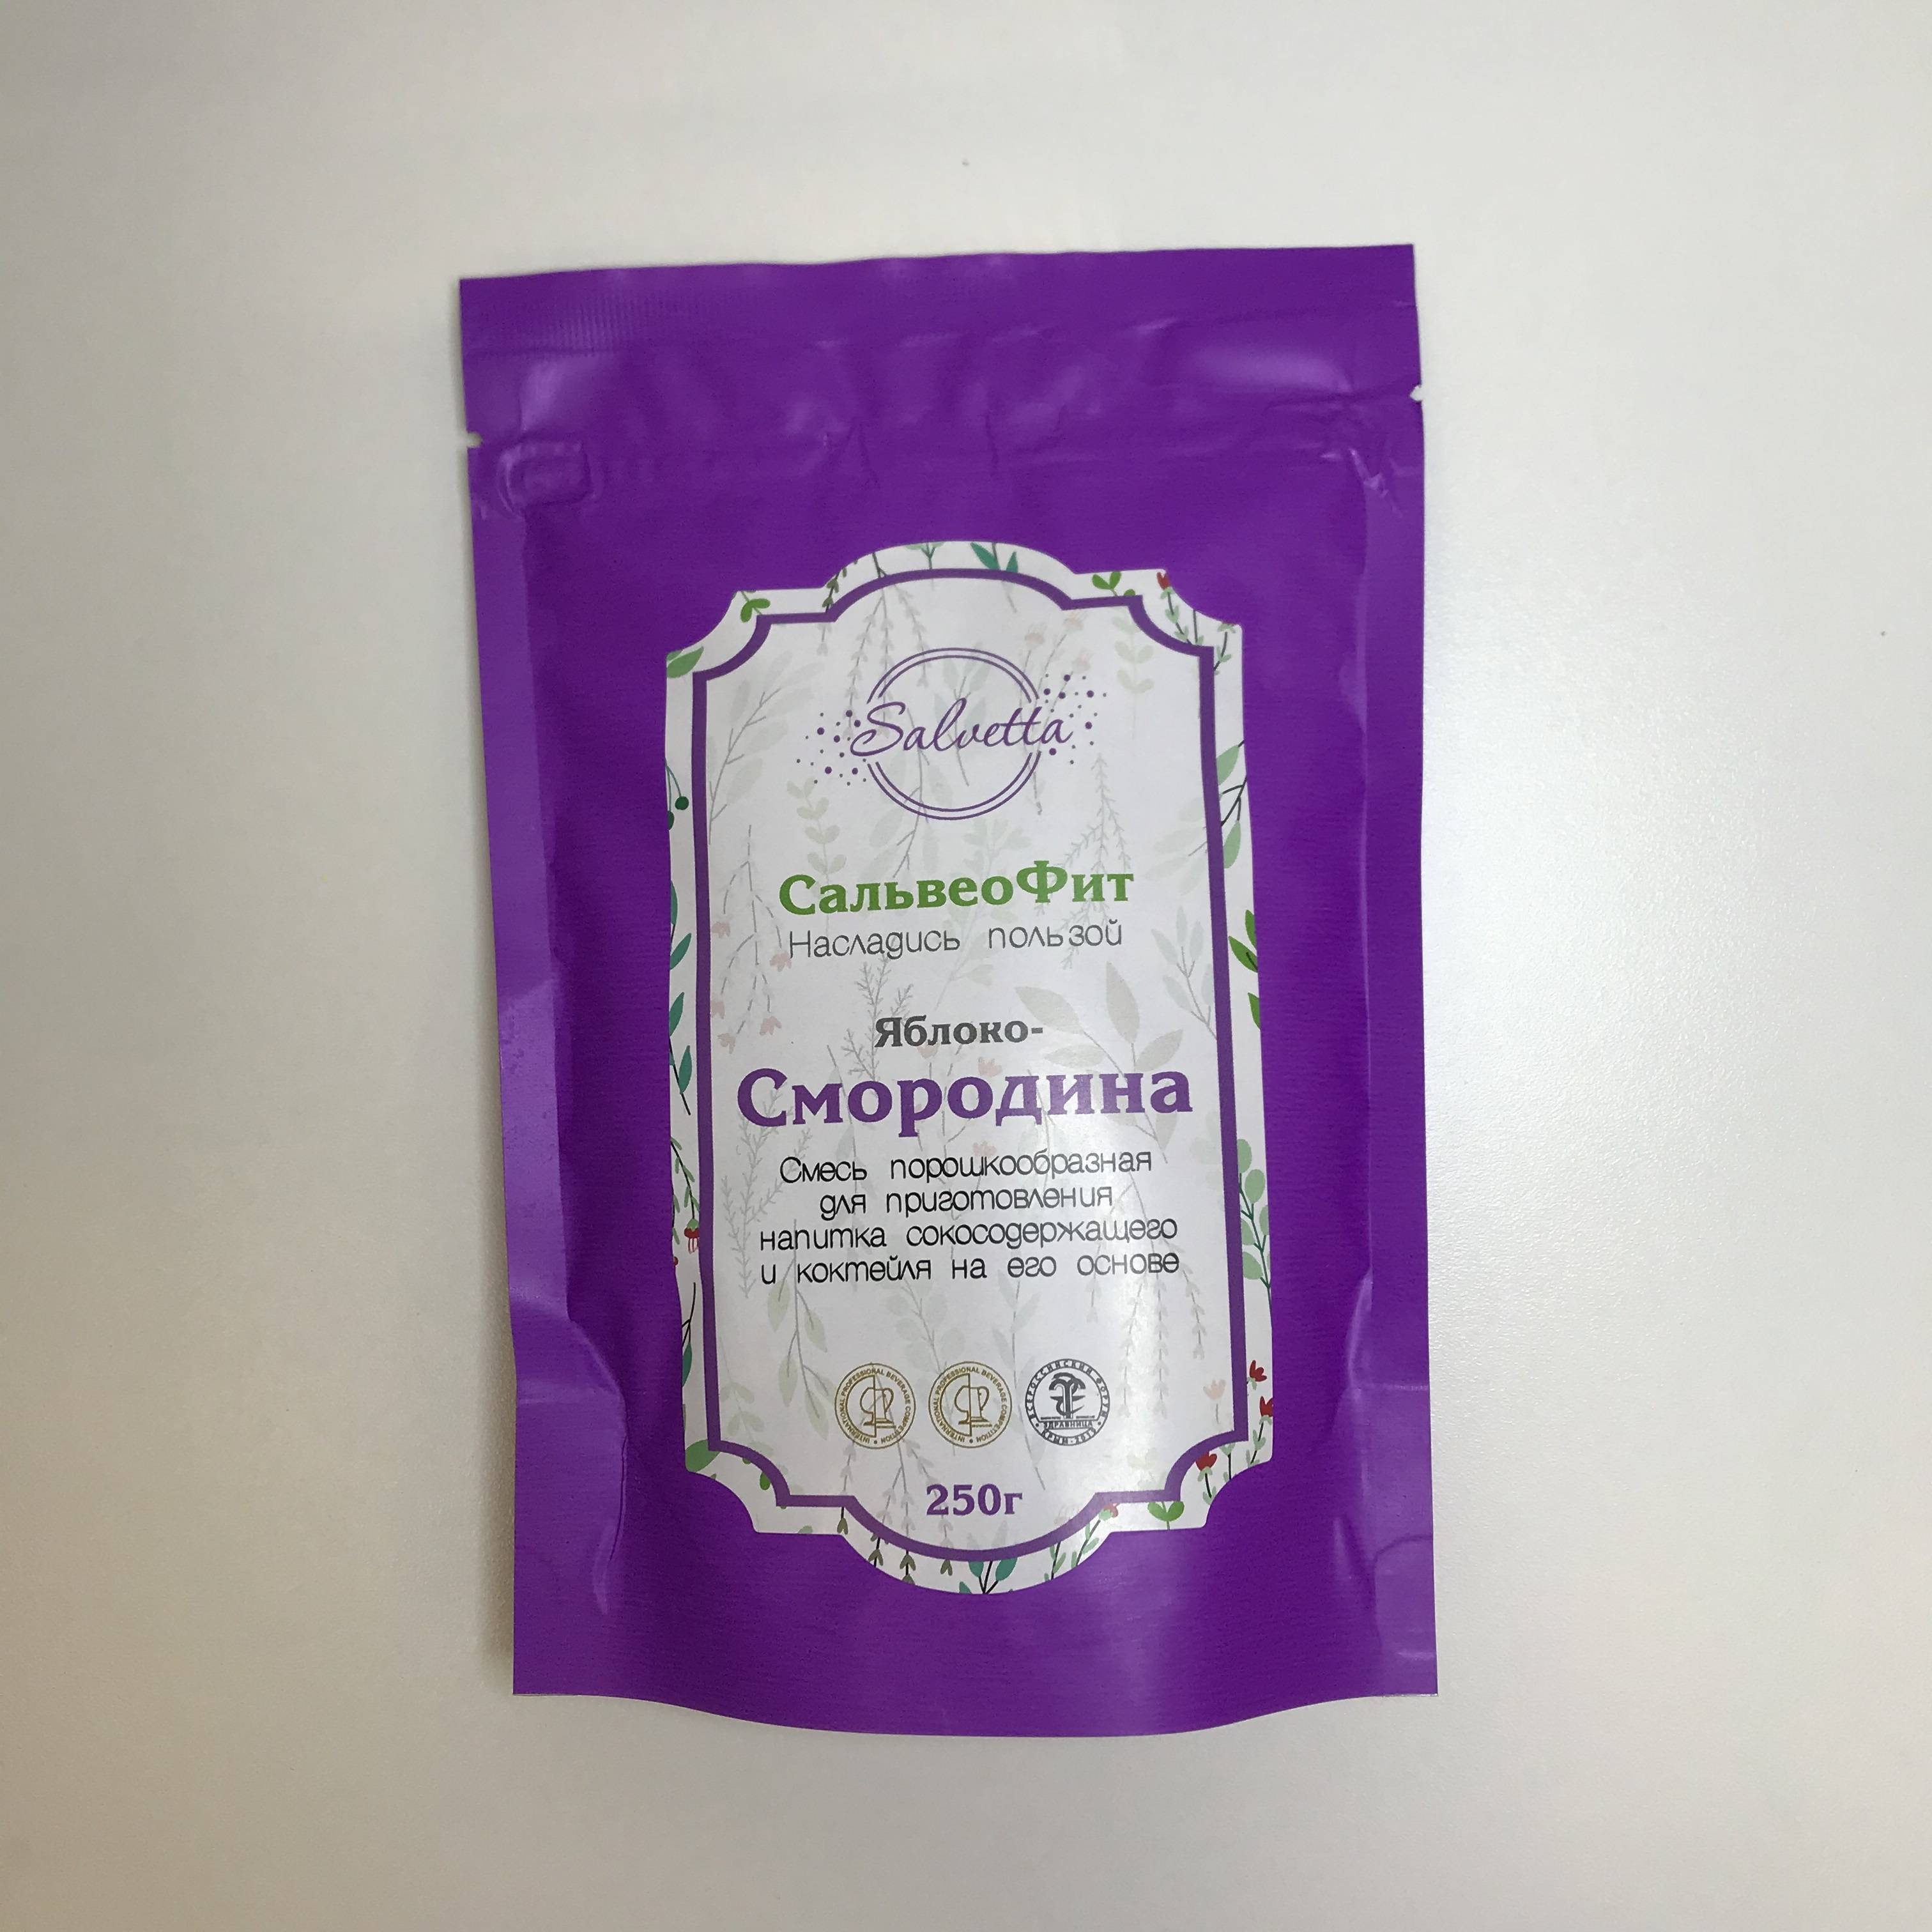 SalveoFit Apple&Currant - ООО САЛВЕТТА - Vegetarian food buy wholesale from manufacturer and supplier on UDM.MARKET